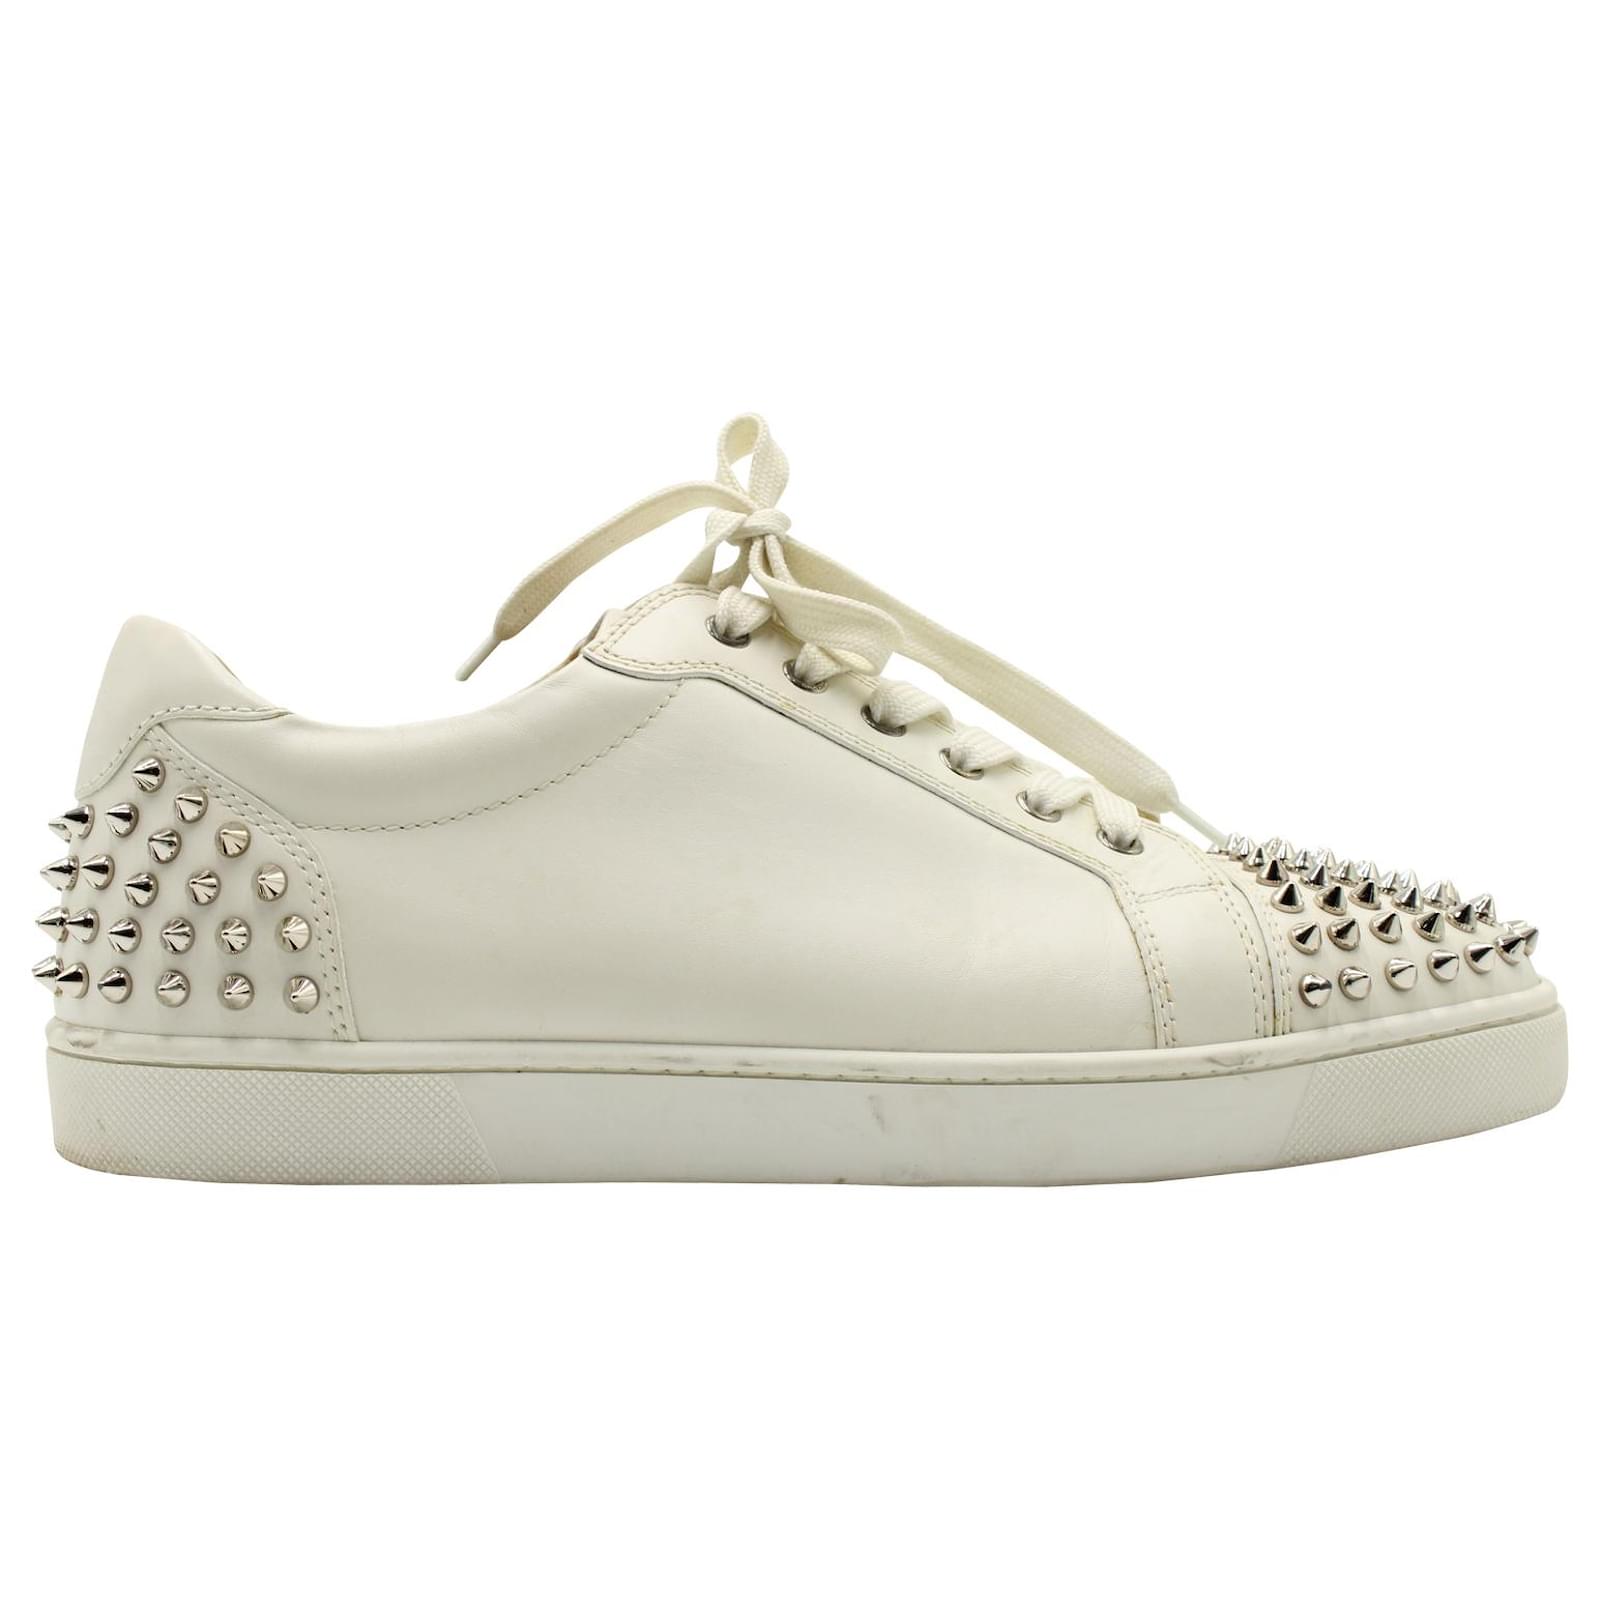 Christian Louboutin Viera 2 Studded Spike Sneakers in White